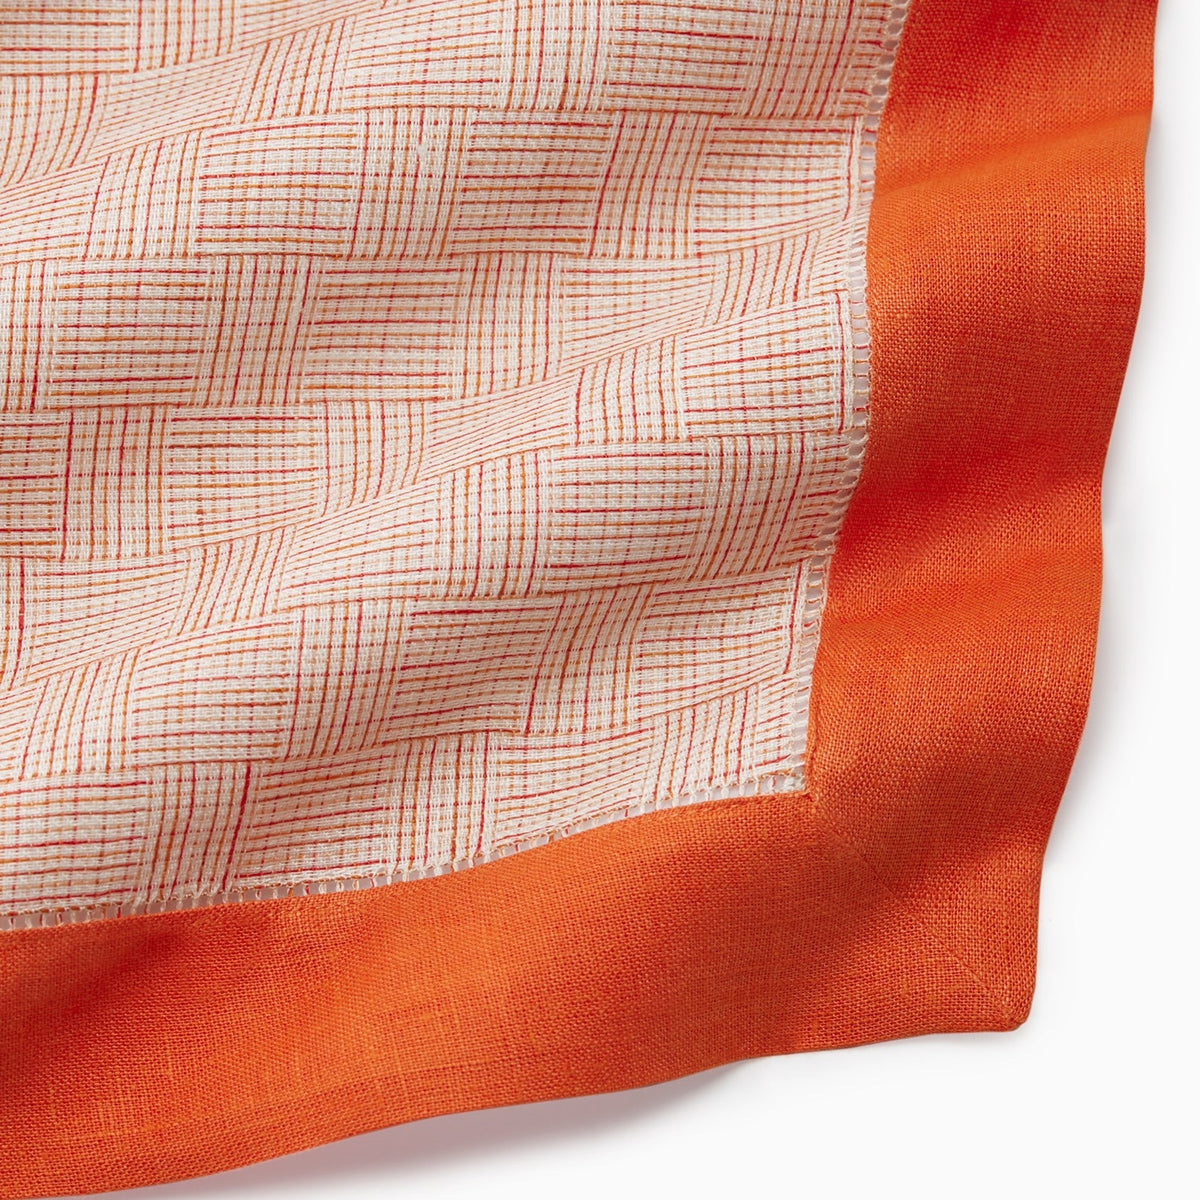 Swatch Sample of Sferra Mikelina Table Linens in Color Tangerine